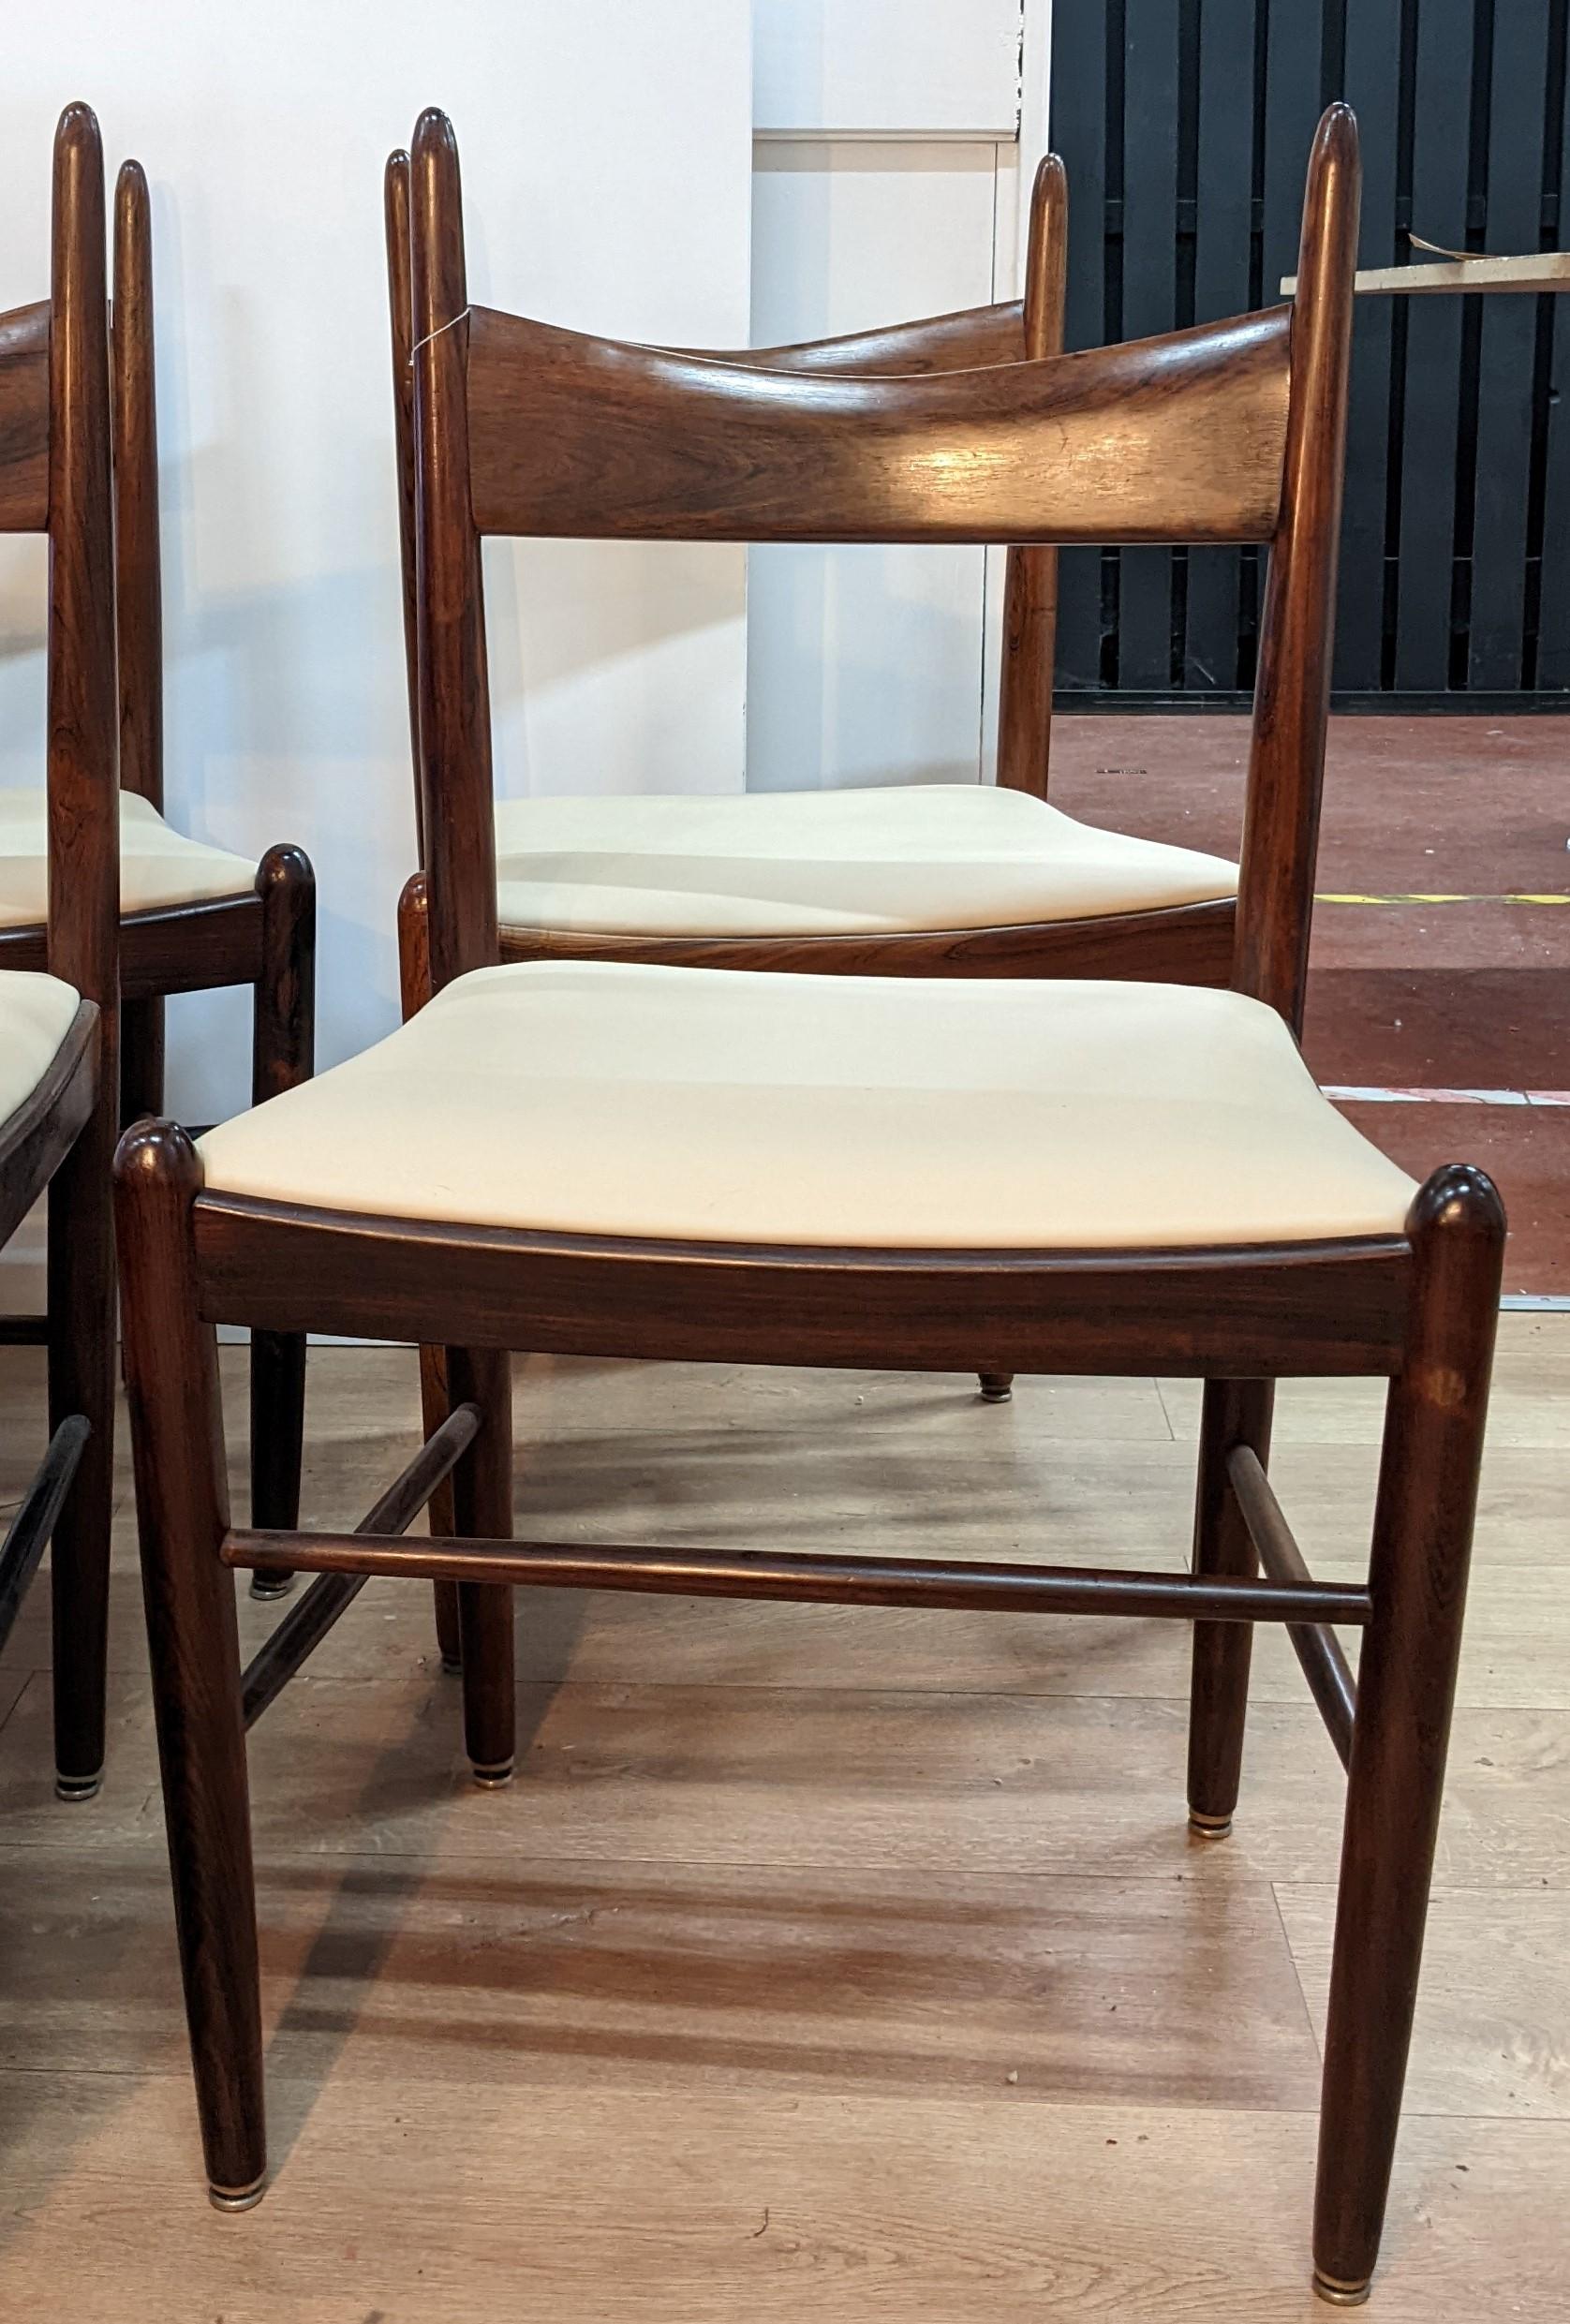 Mid-20th Century Set of 4 Chairs by Vestervig Eriksen for Tromborg Mobelfabrik, Circa 1960 For Sale